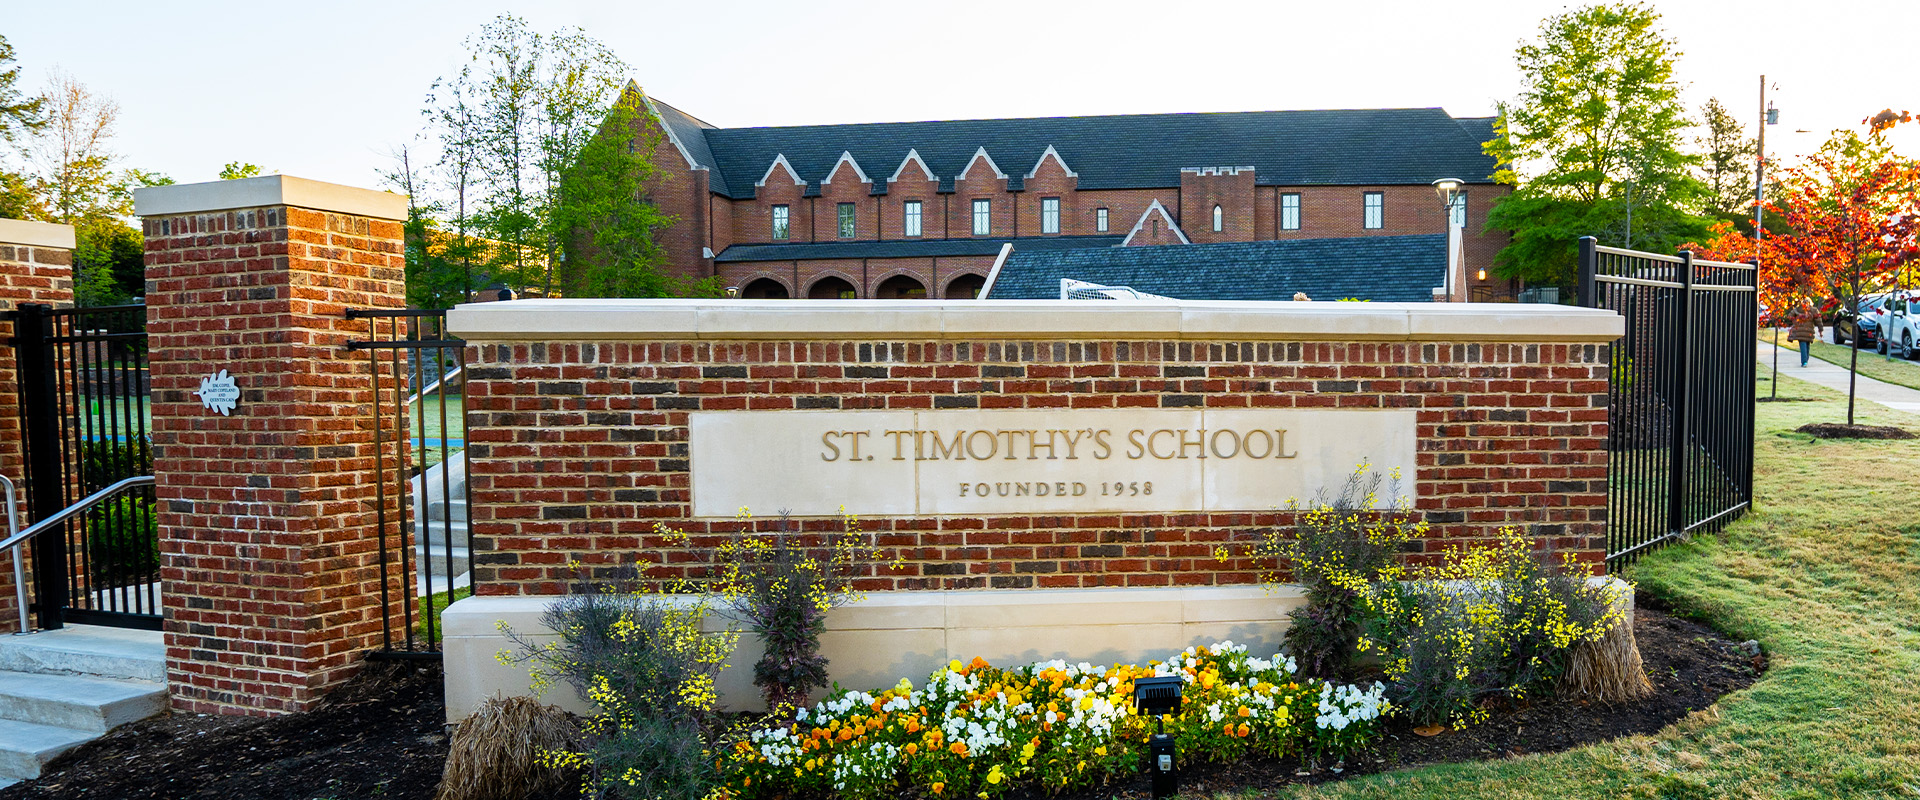 St. Timothy's School front sign